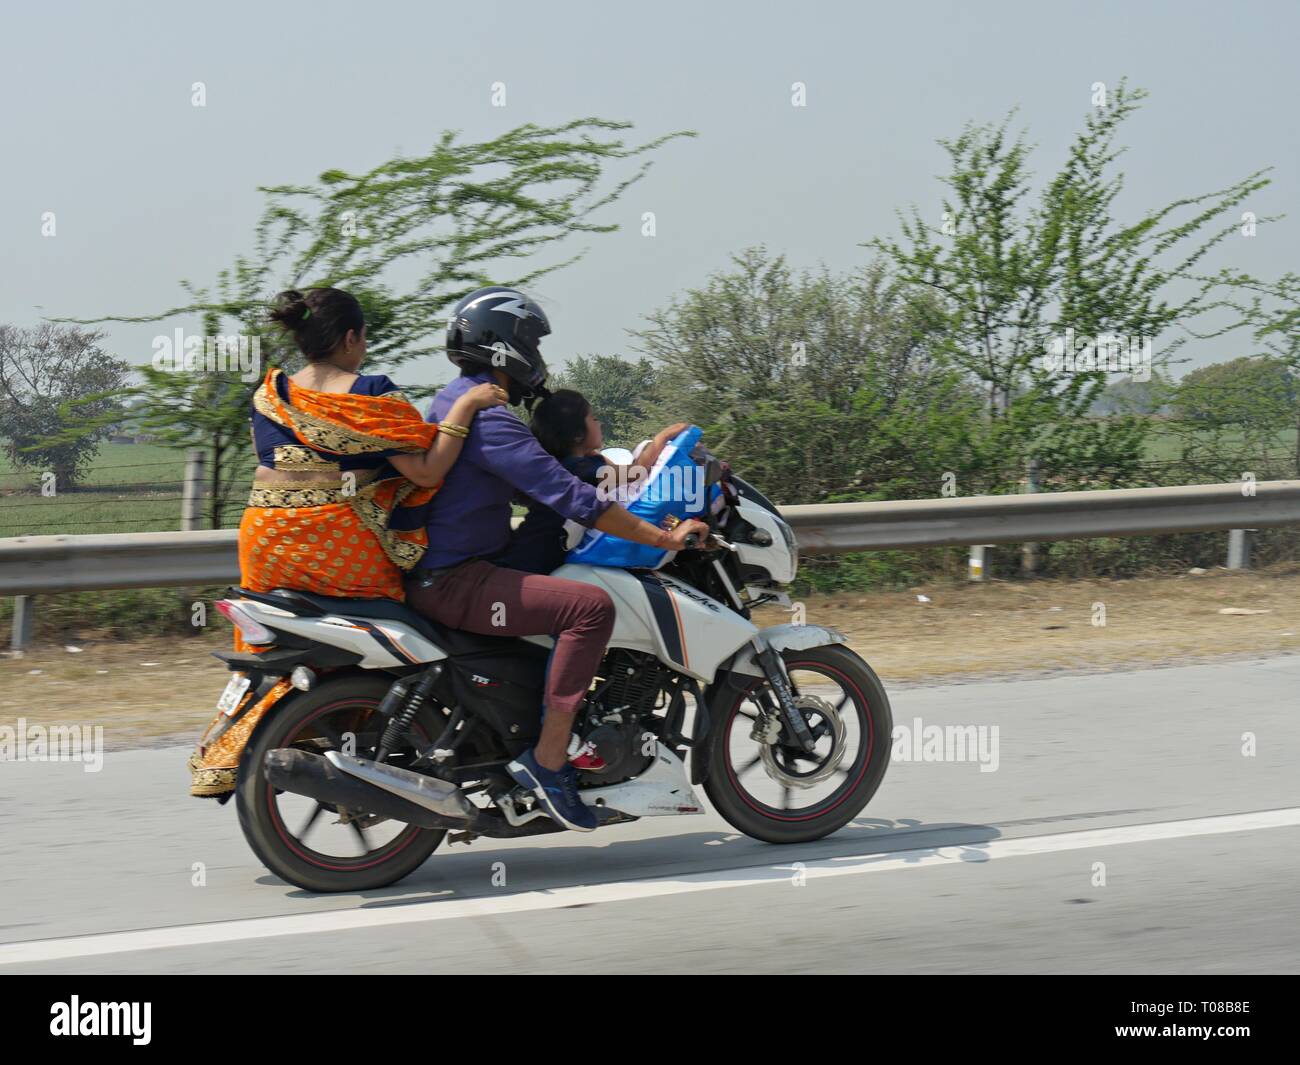 NEW DELHI, INDIA—MARCH 2018: A family rides on a motorcycle in New Delhi. Stock Photo